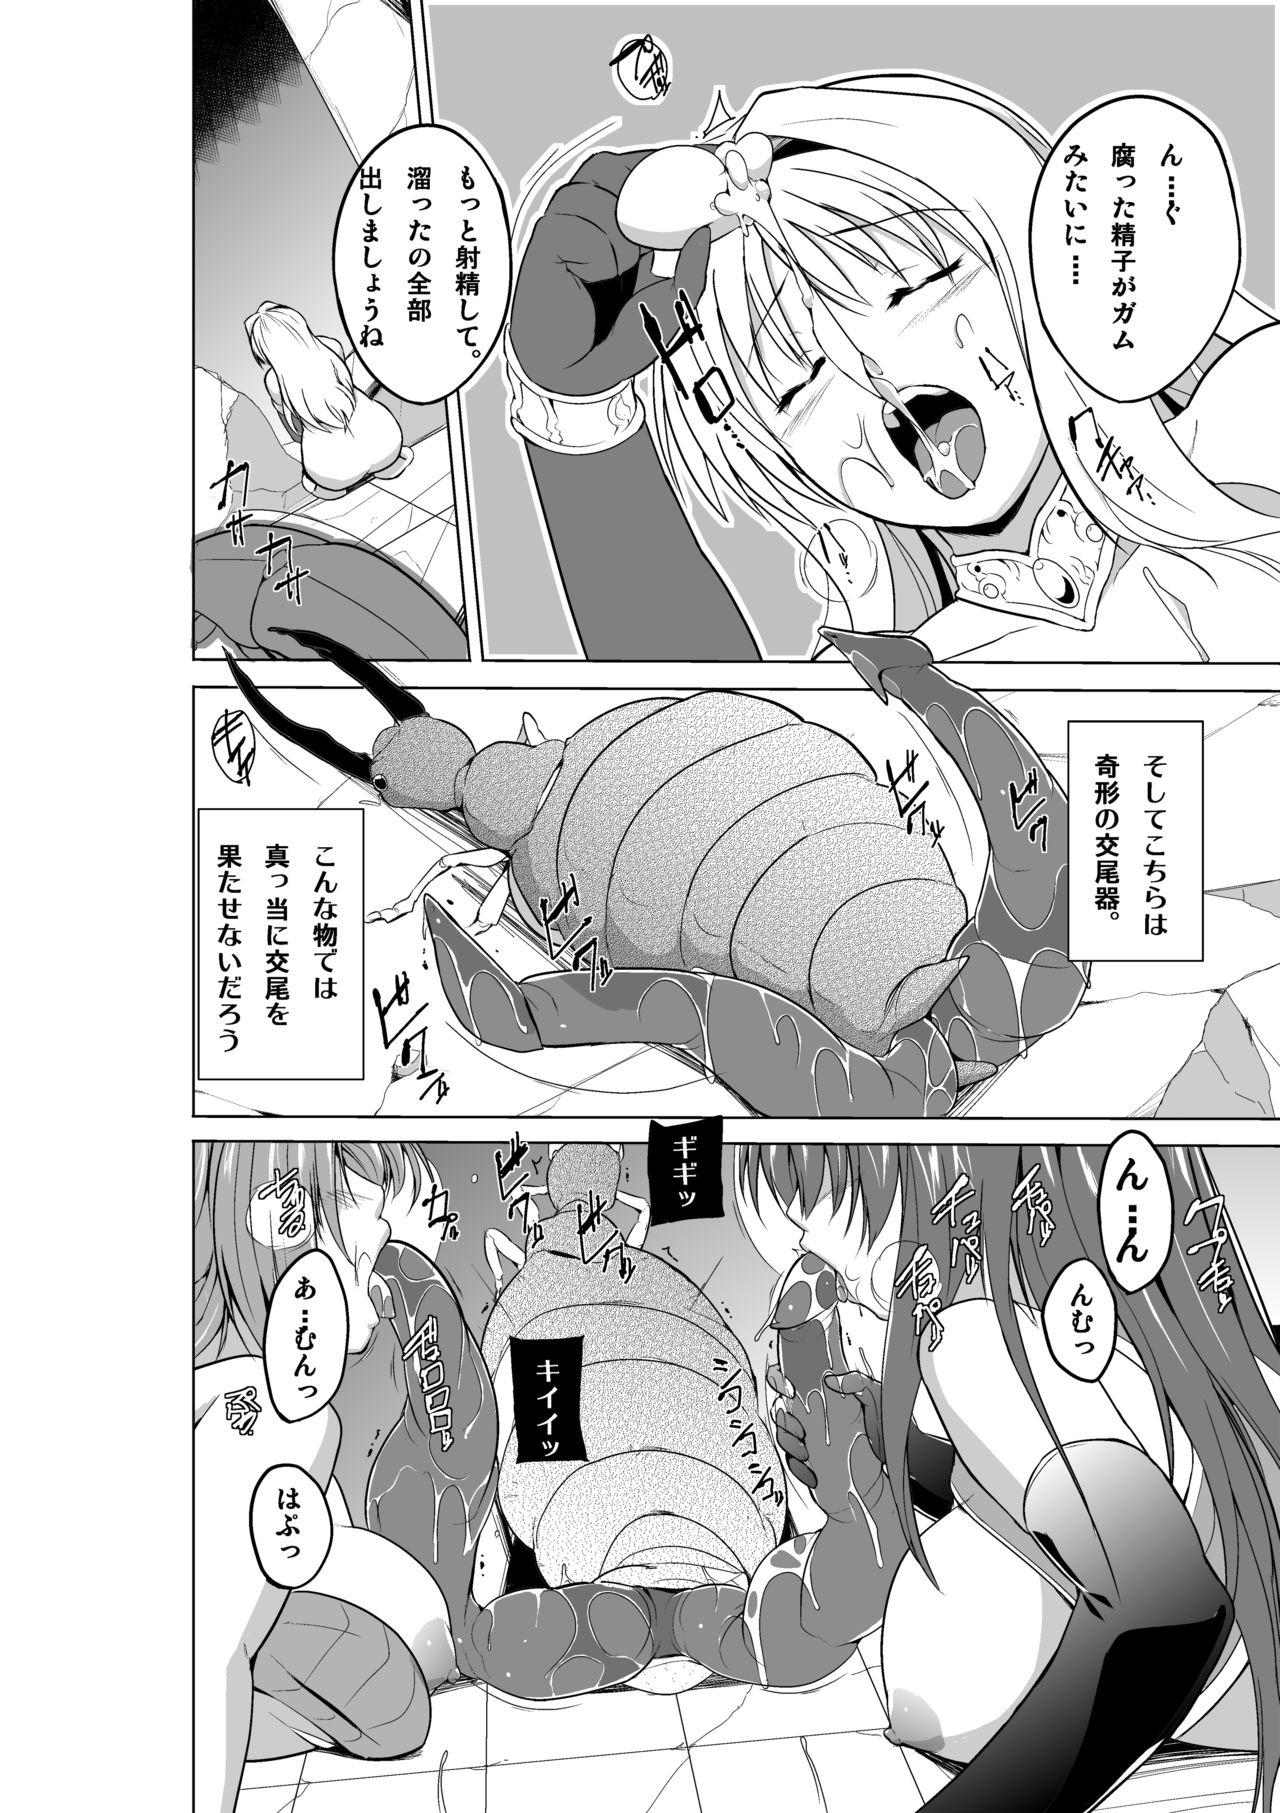 Dildos Dungeon Travelers Minna no Oyuugi - Toheart2 Wet Cunts - Page 6